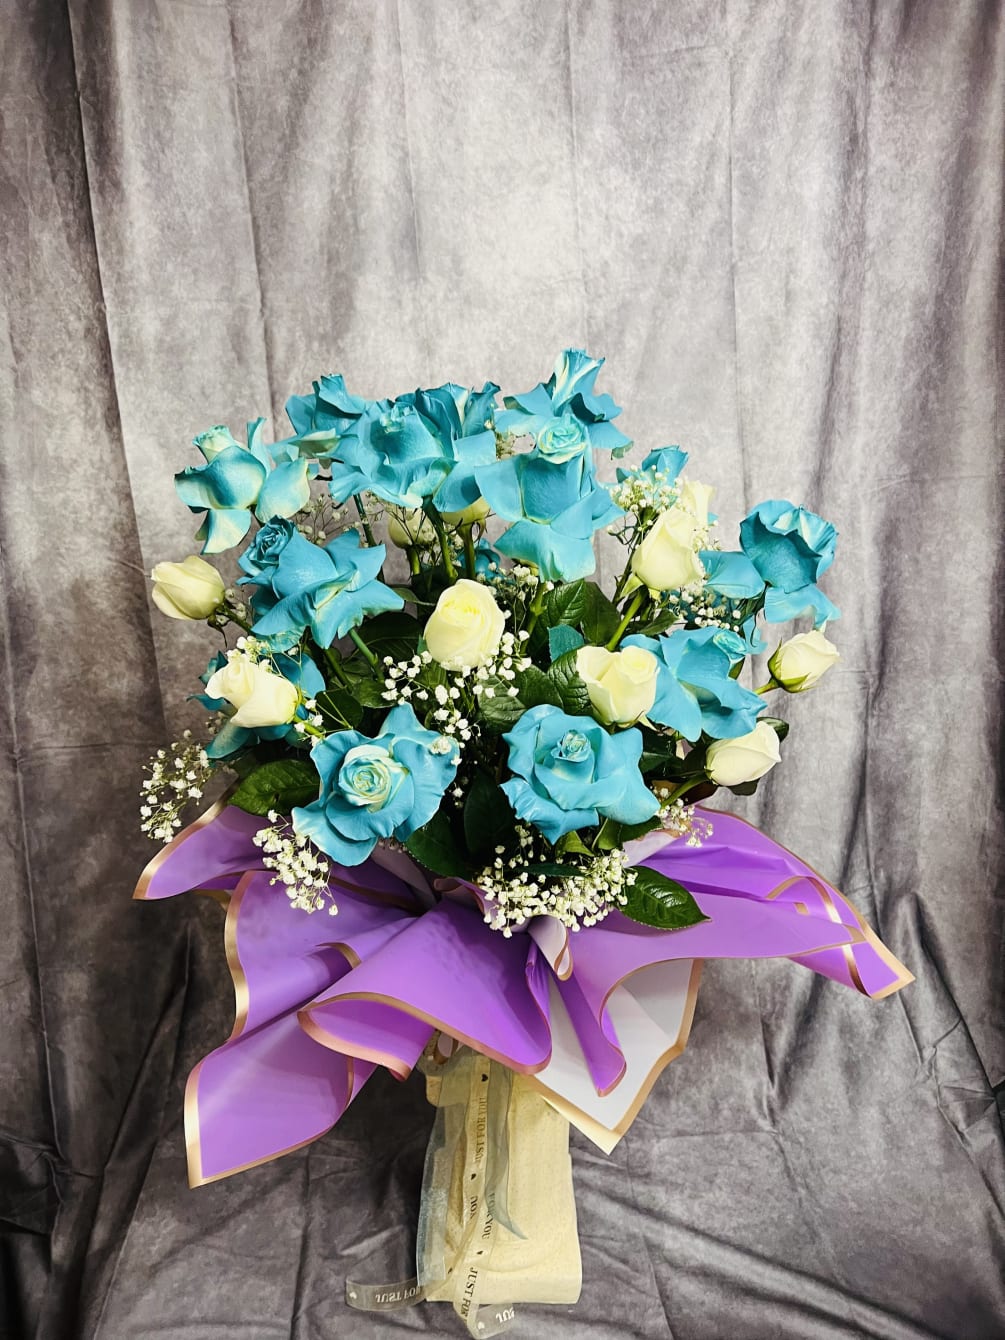 Special custom roses with favorite color of your selection as teal. 